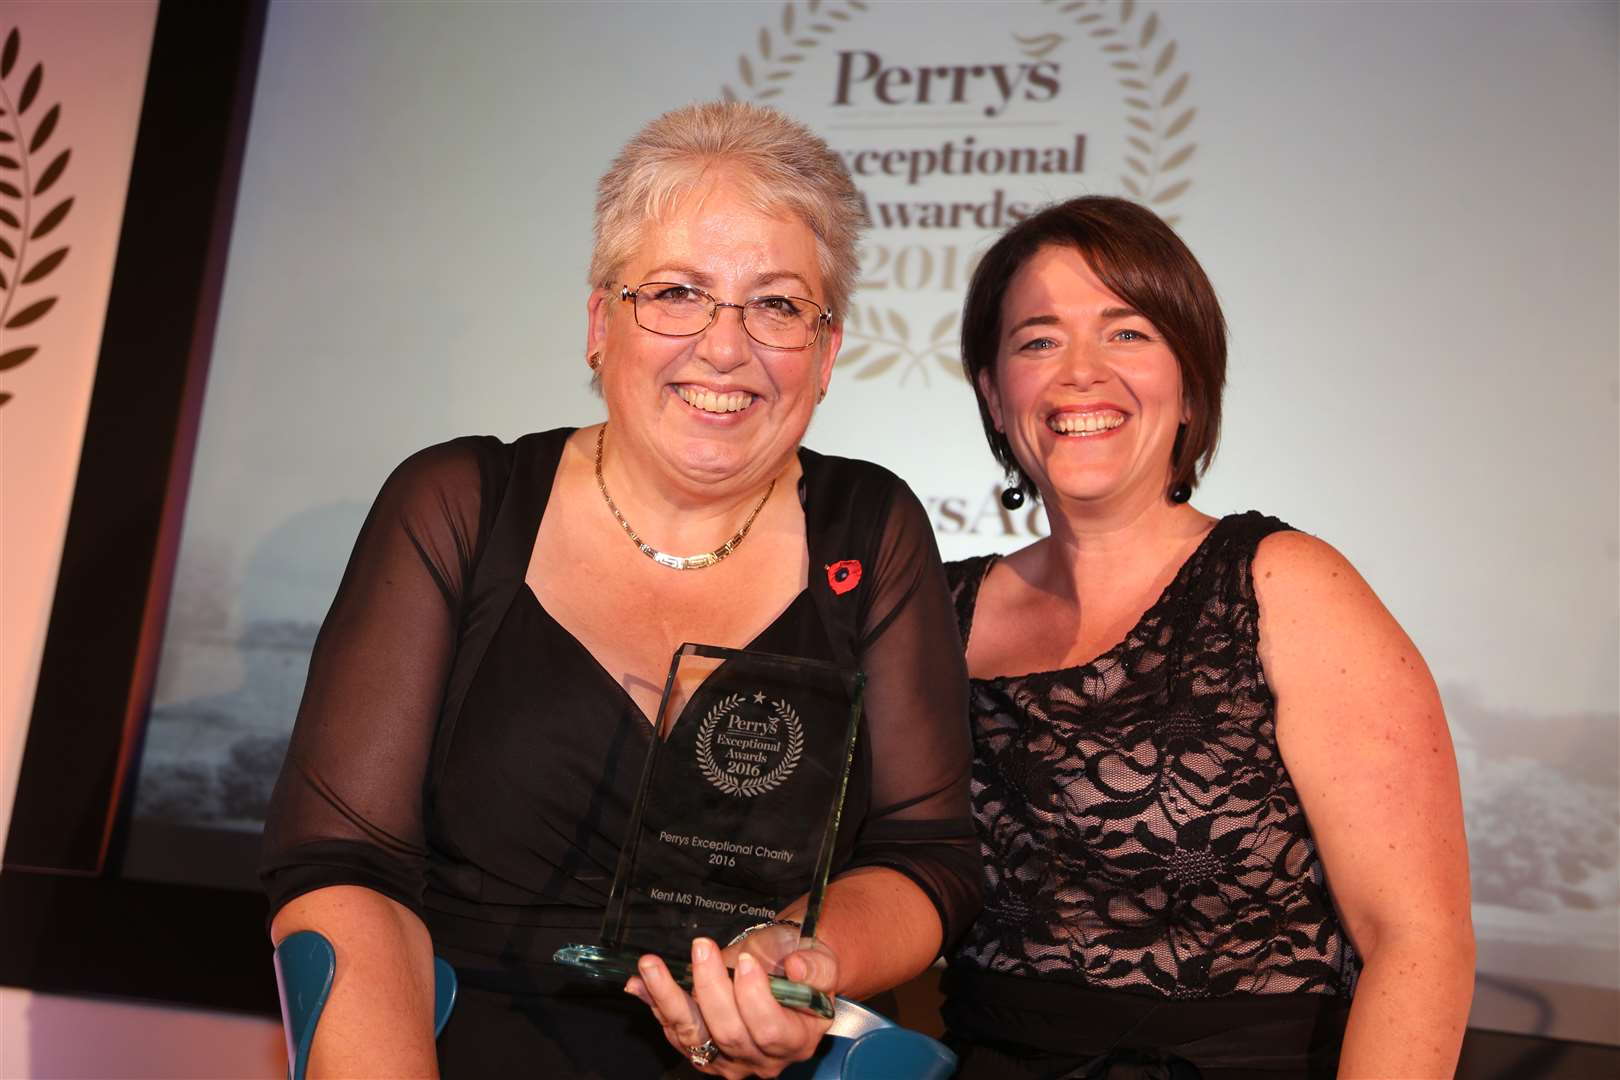 Jill Tompkins and Helen Wathen of Kent MS Therapy Centre, which won Perrys Exceptional Charity